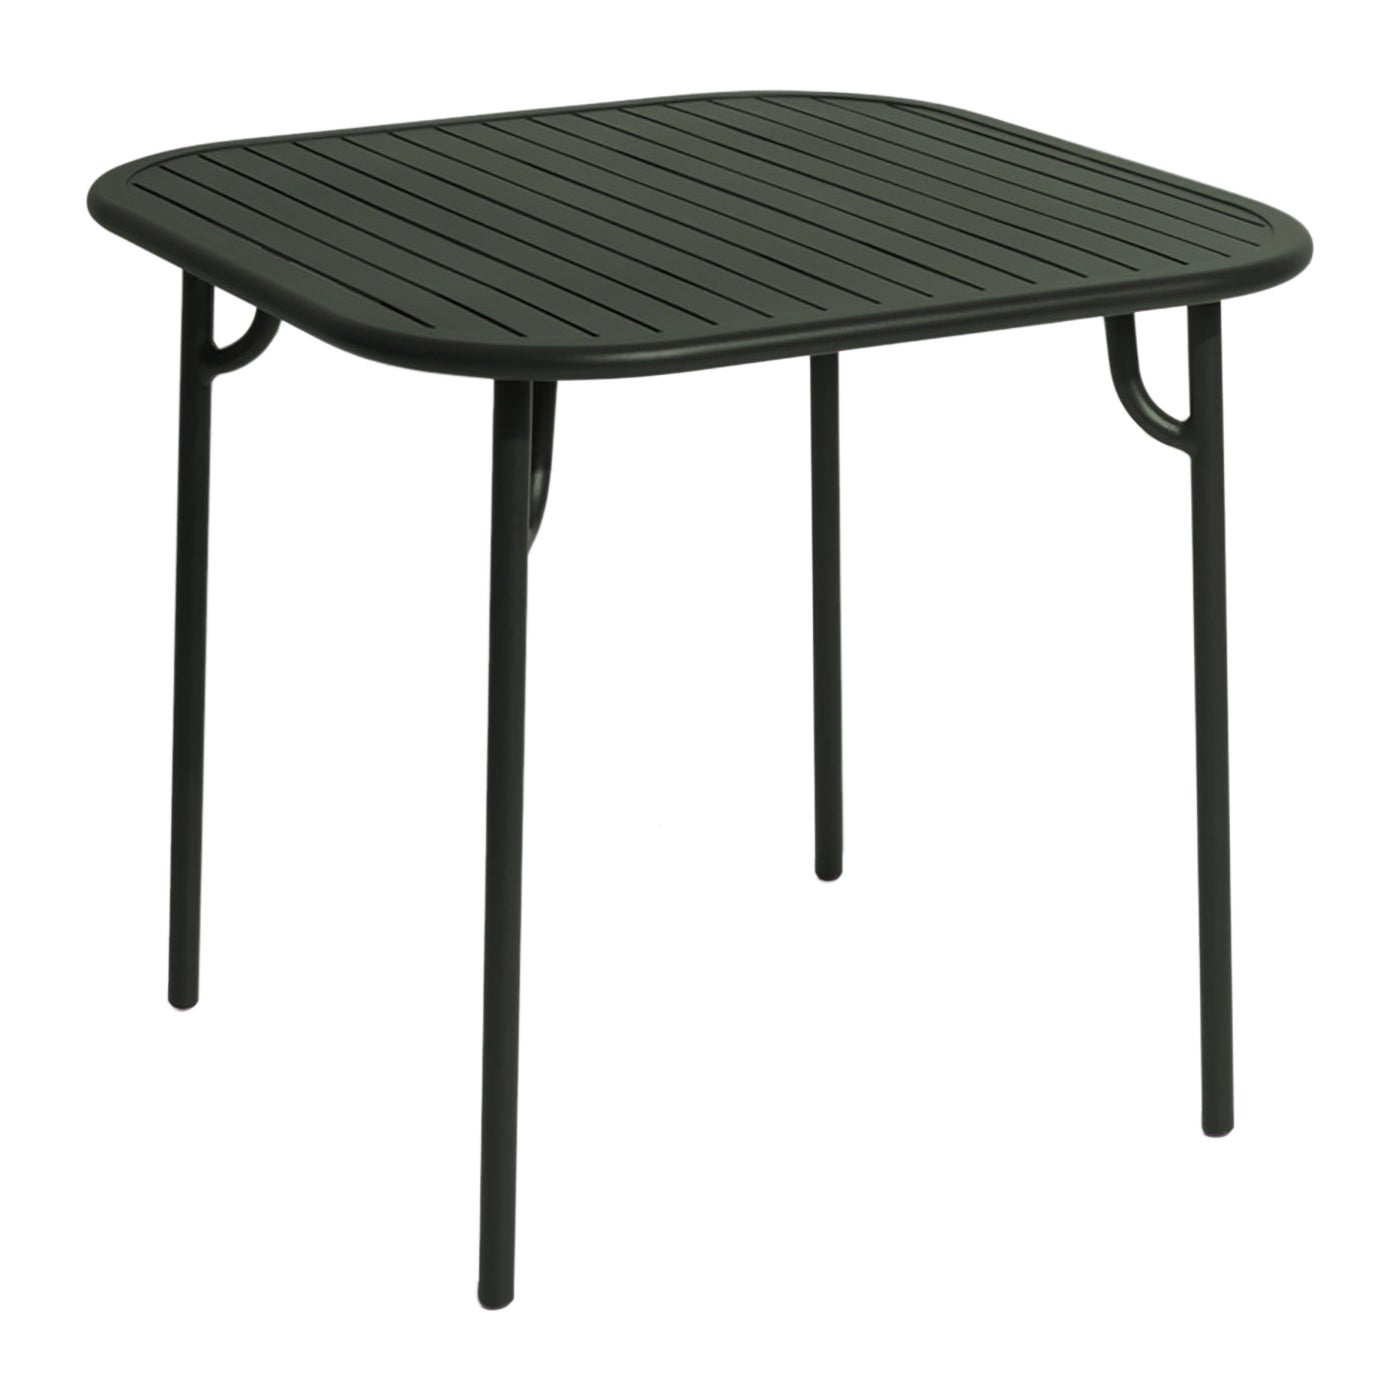 Petite Friture Week-End Square Dining Table in Glass Green Aluminium with Slats For Sale